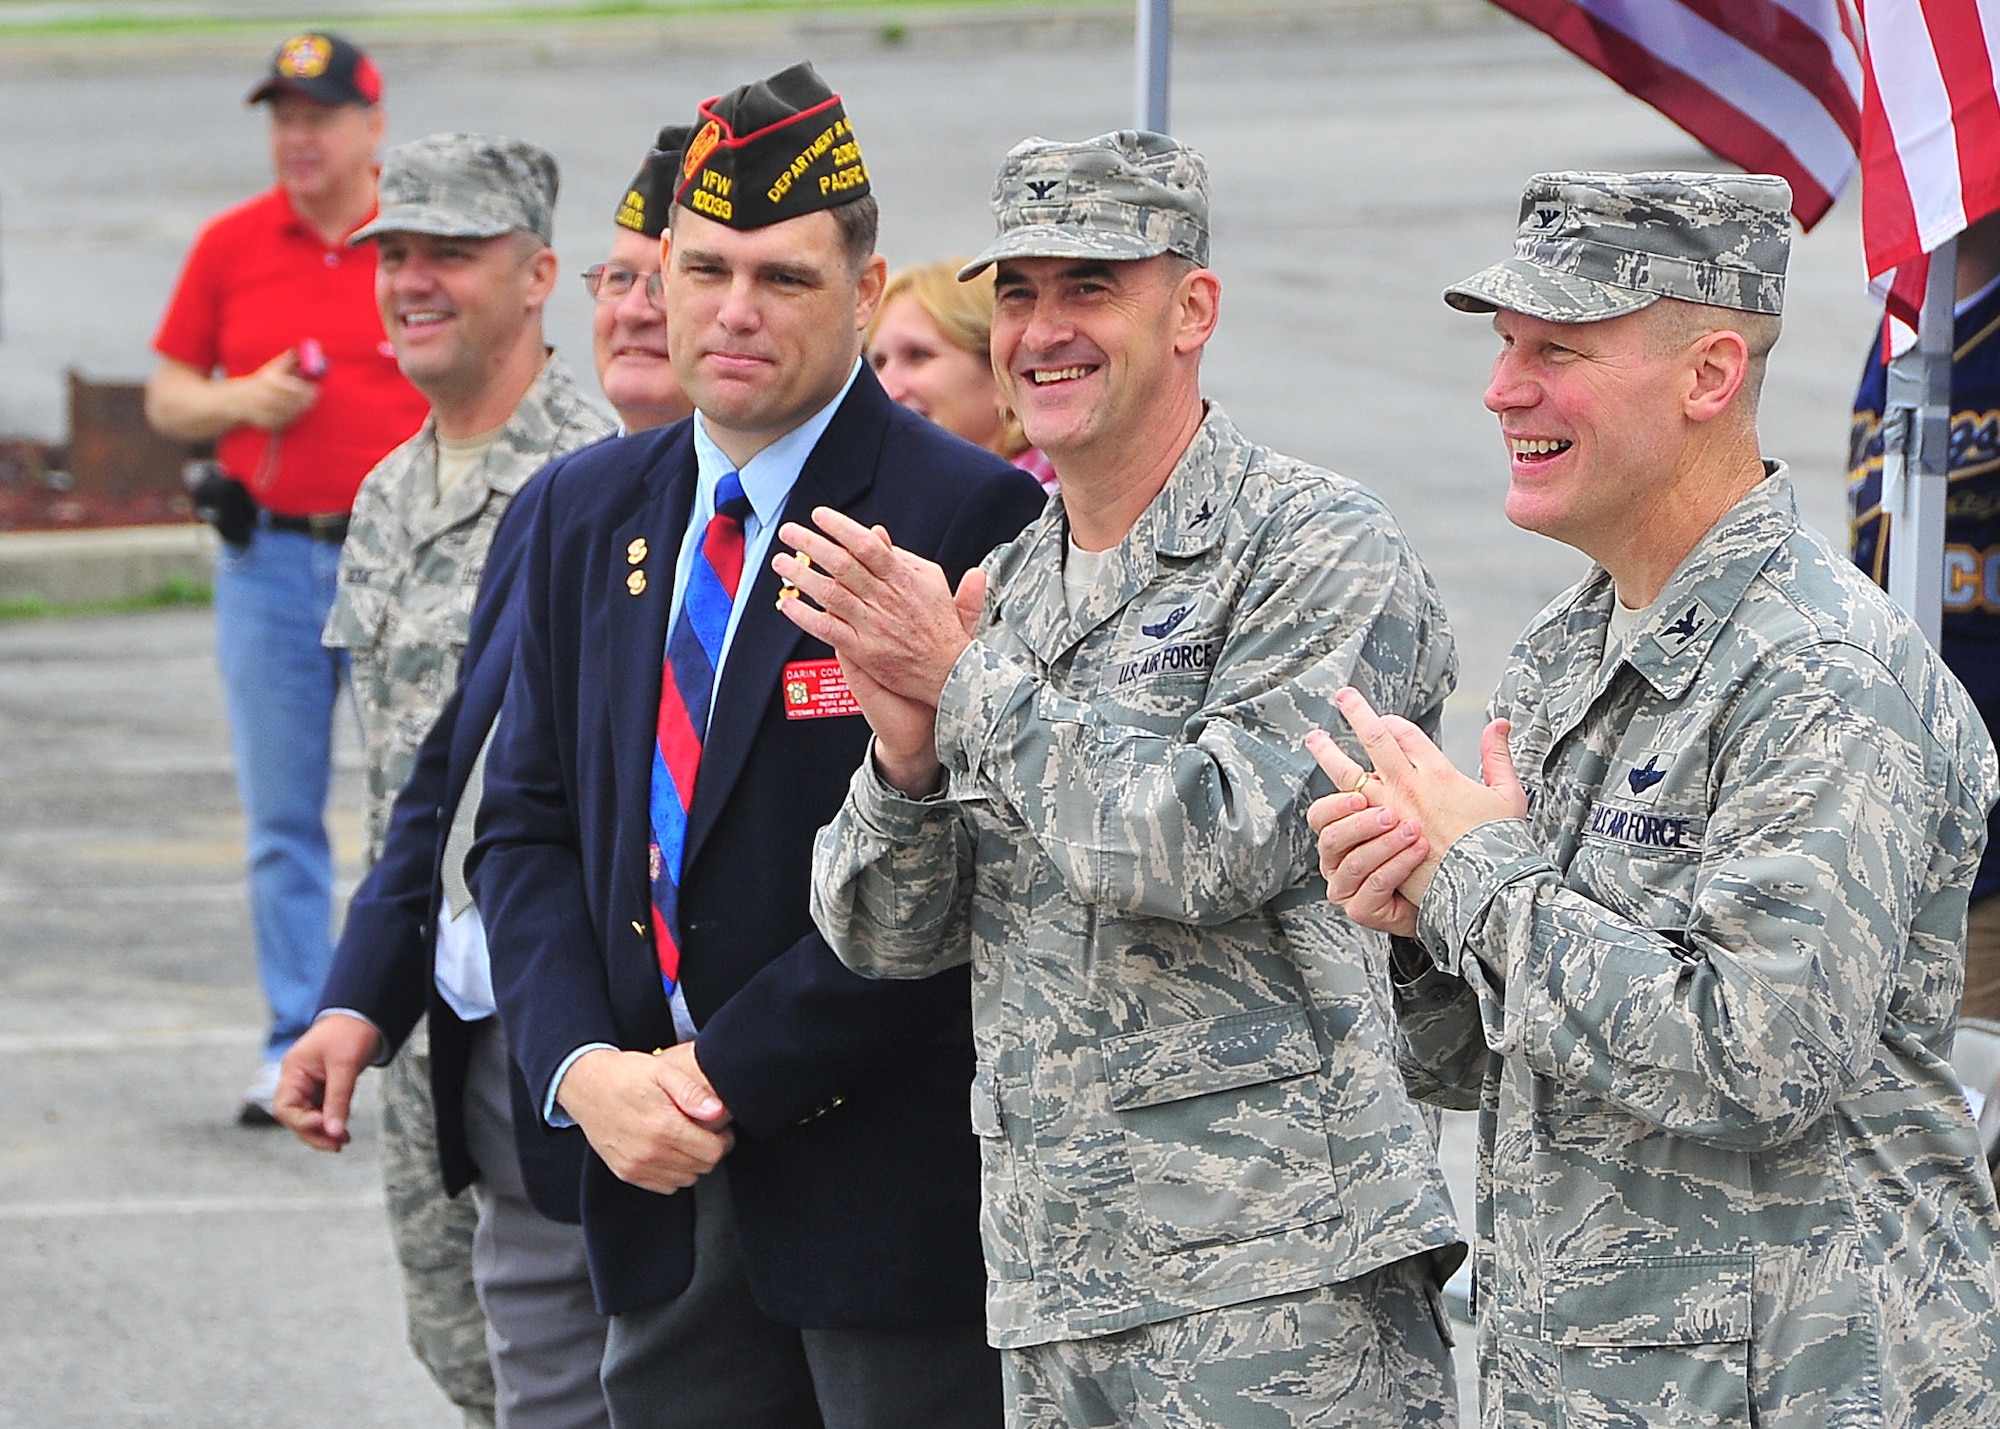 The annual VFW Armed Forces Day Parade was held at Osan Air Base, Republic of Korea, May 21.  Starting at the main gate, more than 25 squadrons and organizations participated, showcasing unit guide-ons and squadron vehicles. (U.S. Air Force Photo by/Staff Sgt. Daylena Gonzalez)